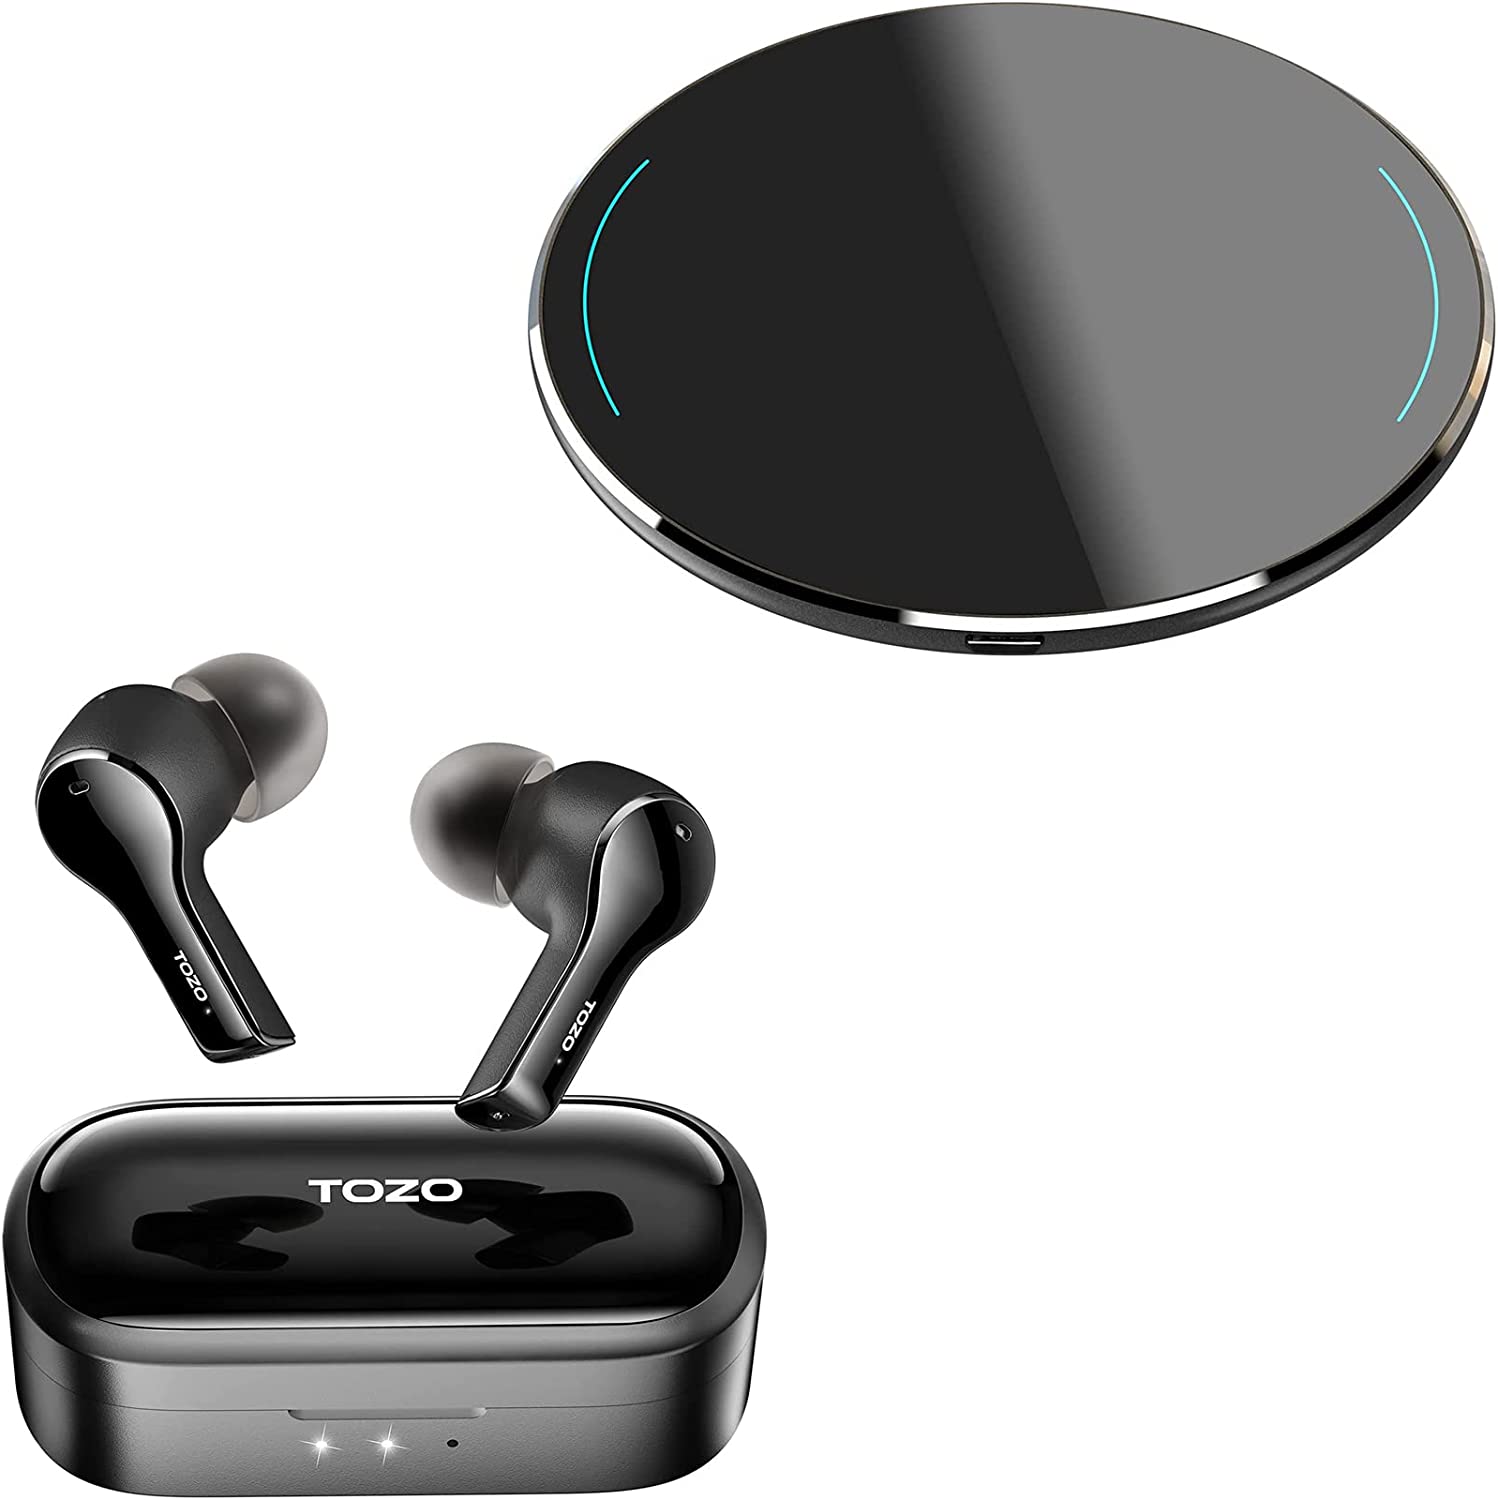 TOZO T9 True Wireless Earbuds ENC 4 Mic Call Noise Cancelling Bluetooth 5.0 Headphones & TOZO W1 Wireless Charger